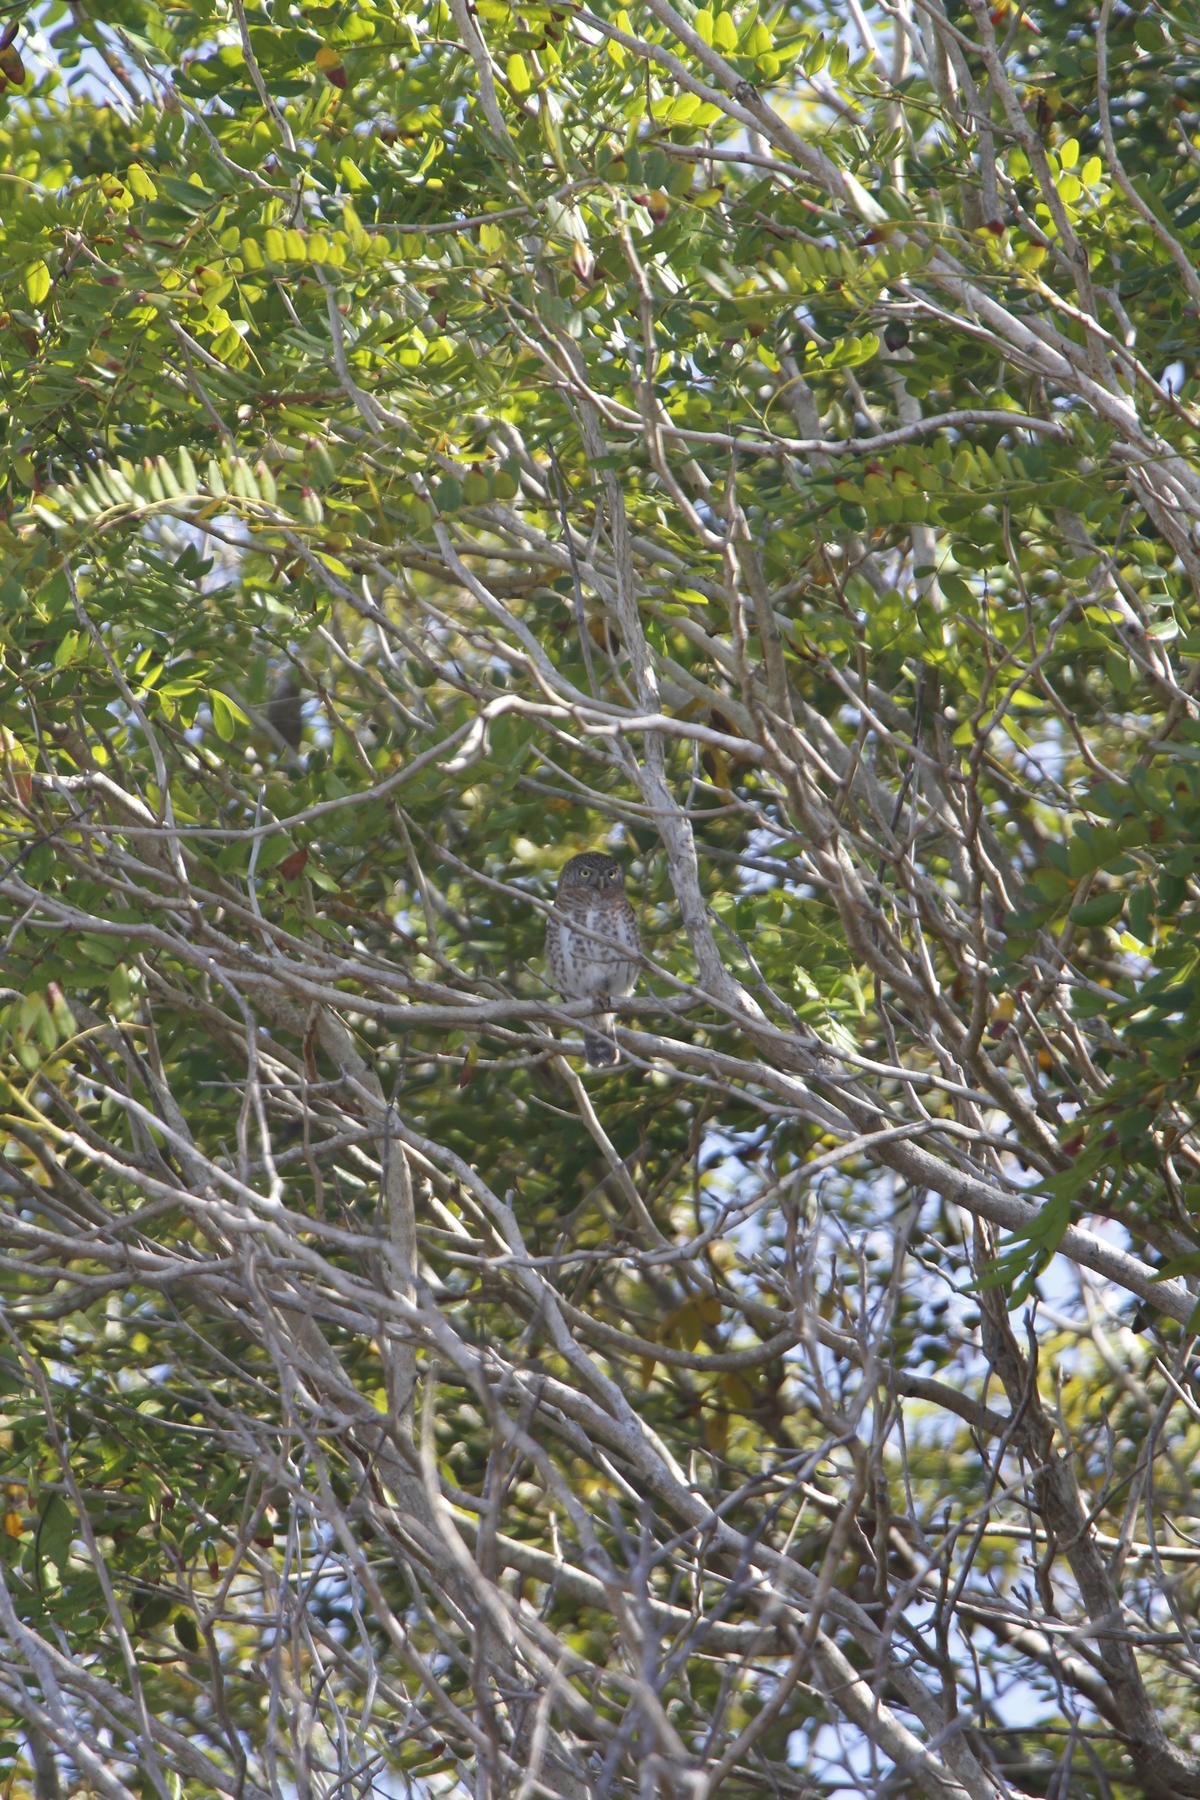 Students spotted a Cuban pygmy owl. (Photo courtesy of Mark White)